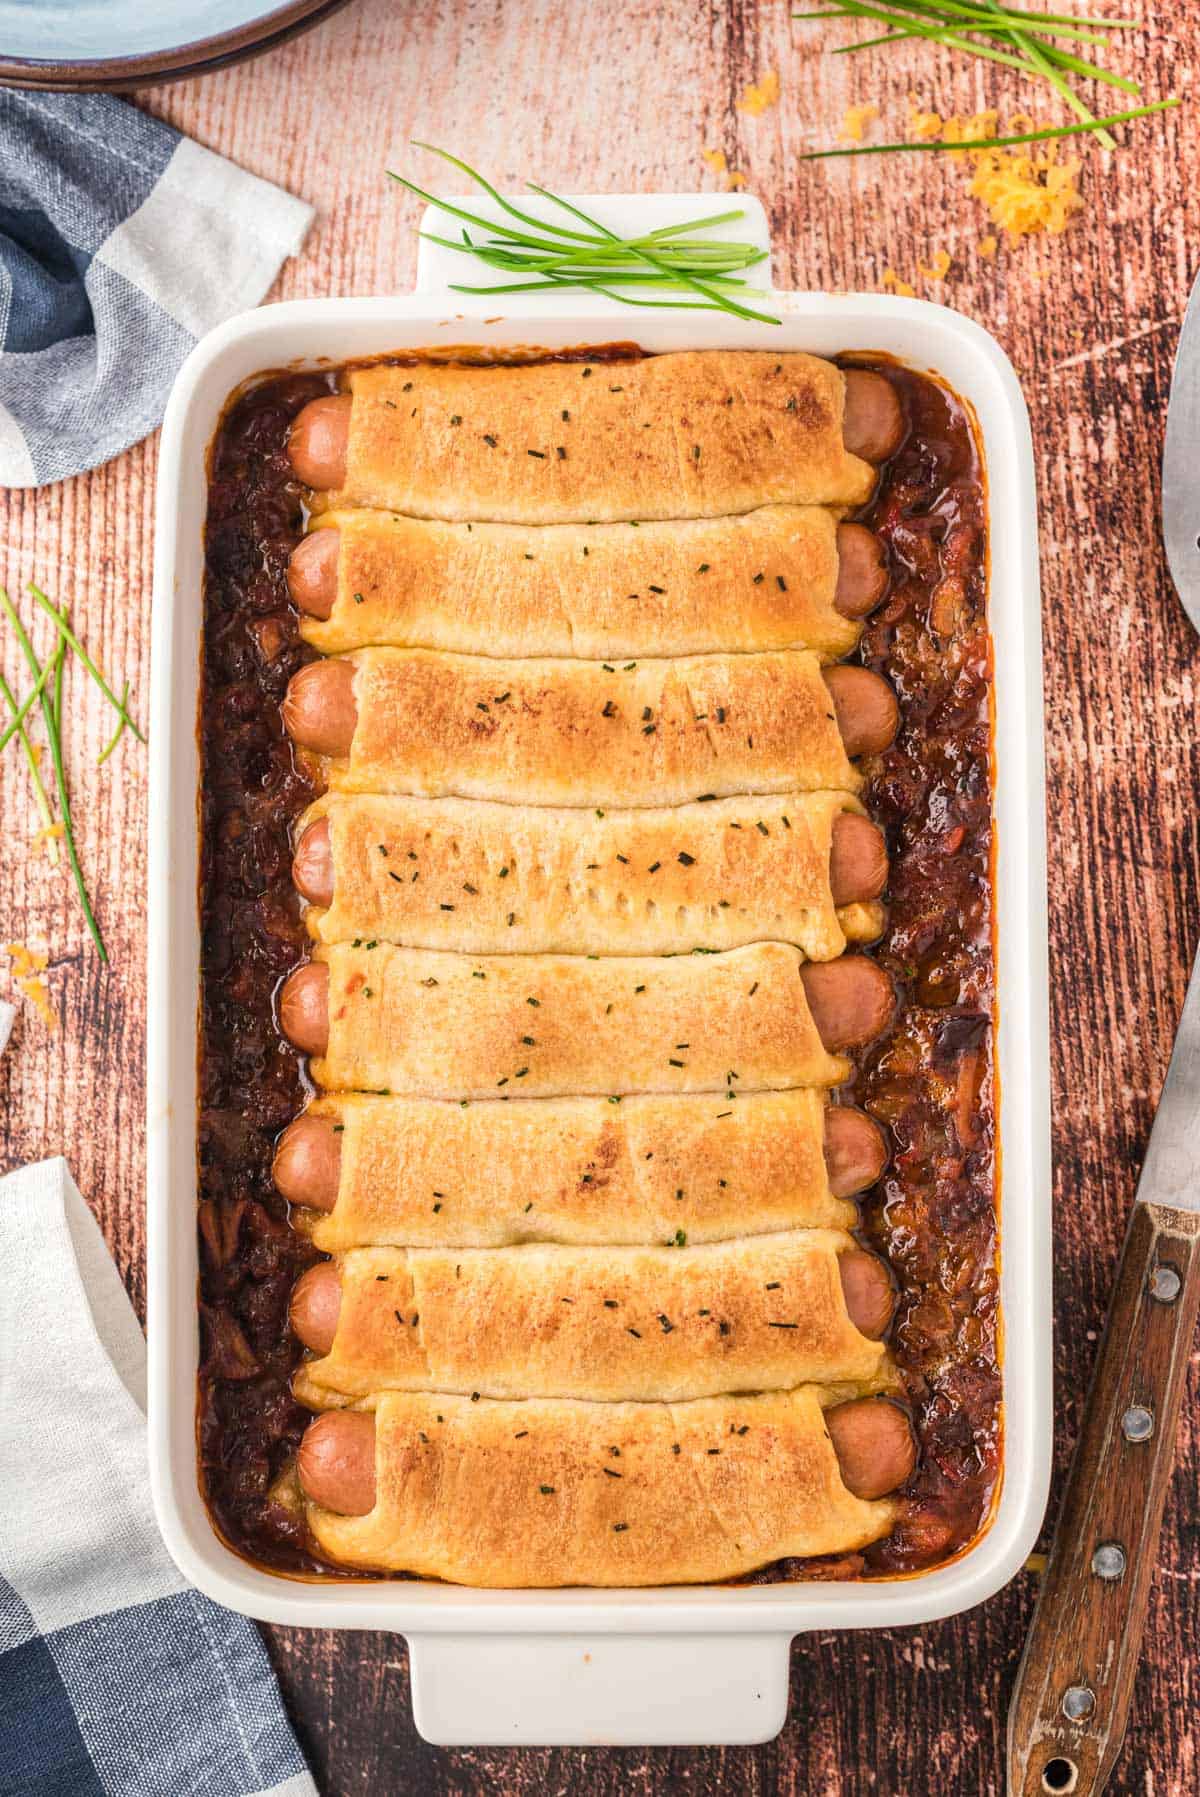 A dish of baked chili cheese dog casserole.